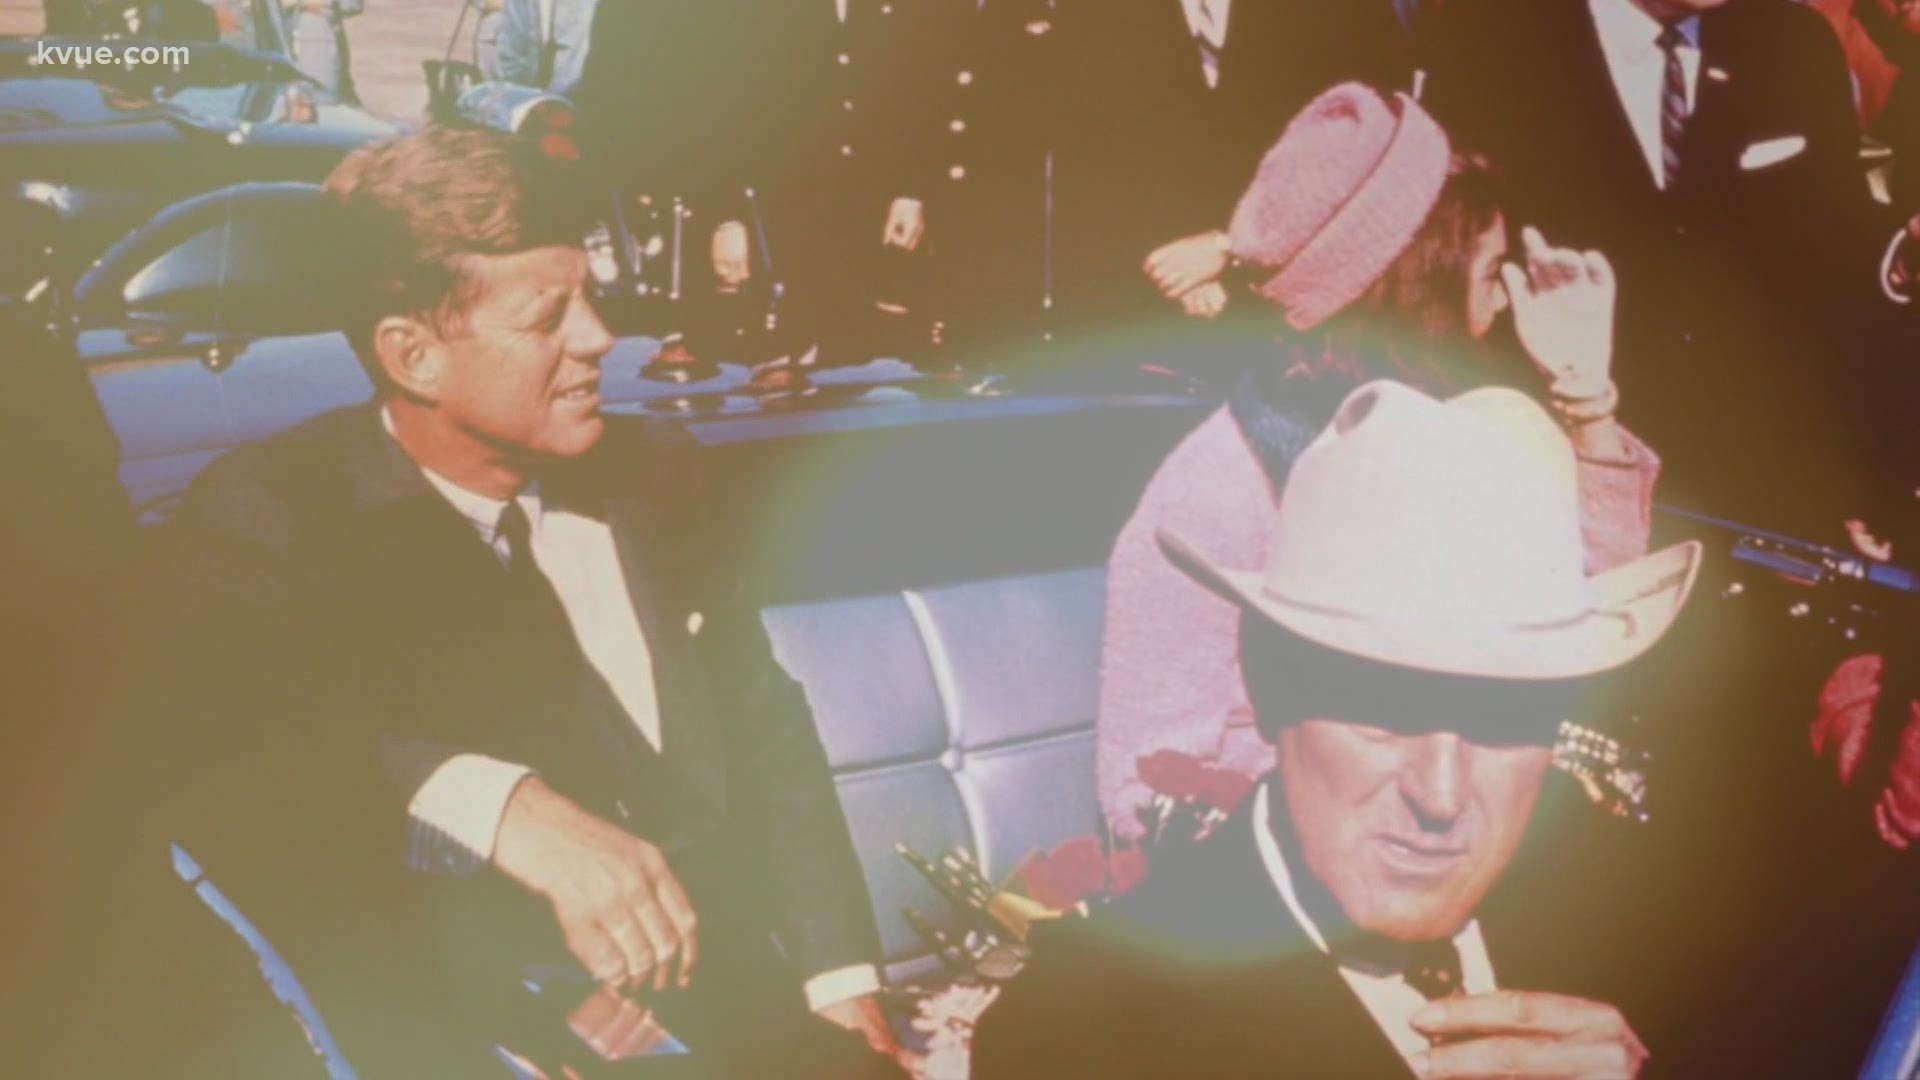 On November 22, 1963, President Kennedy was assassinated in Dallas. A new book reveals stories about the shootings that have never been heard before.